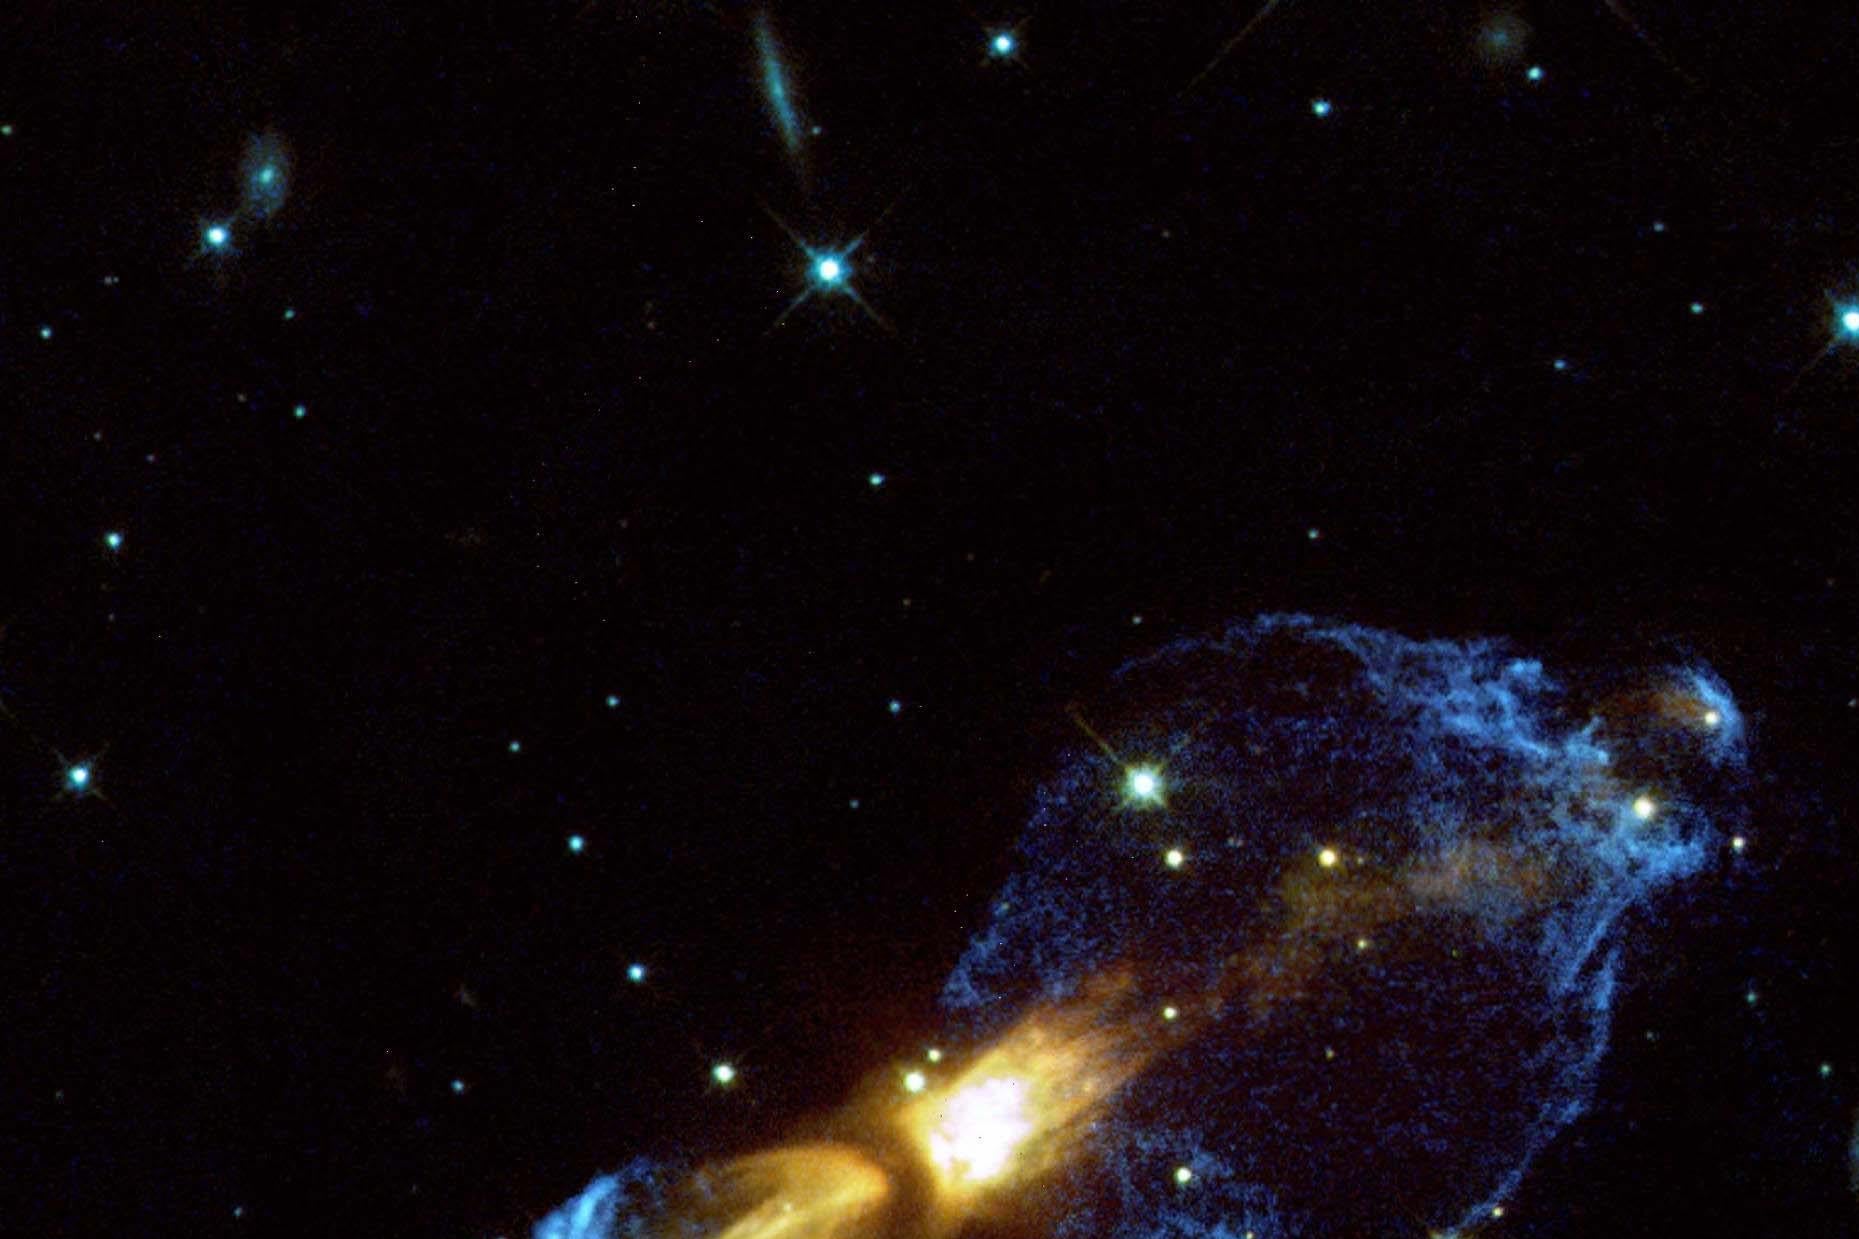 A telescope image with a large blue-yellow nebula and the center and various stars surrounding it.